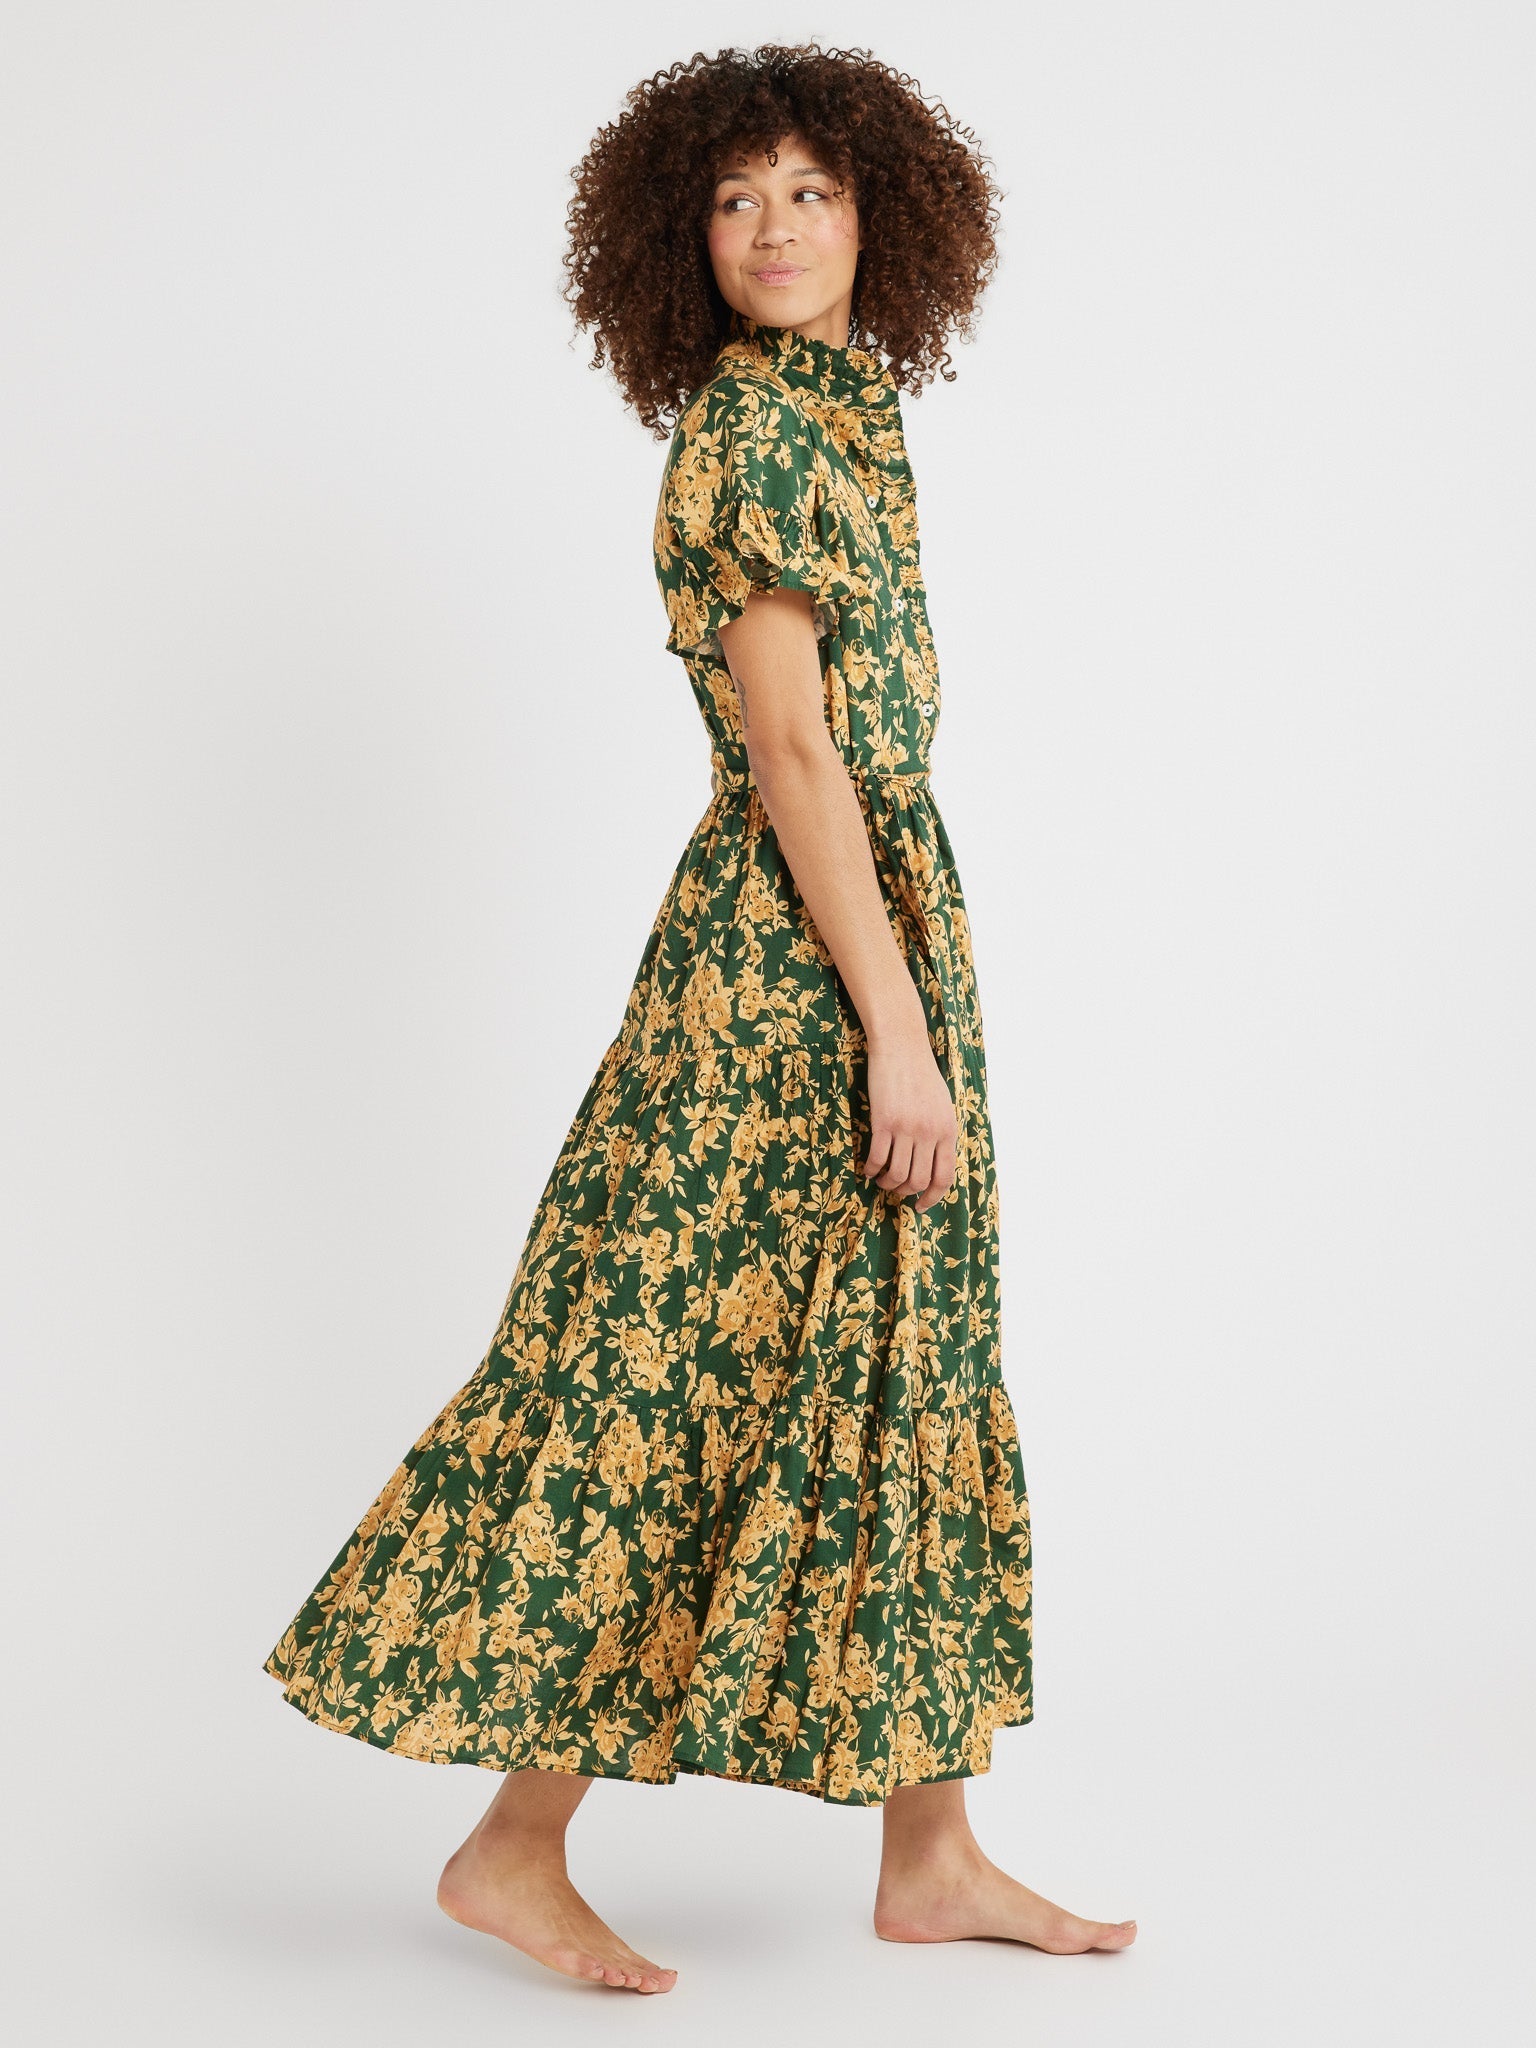 MILLE Clothing Victoria Dress in Emerald Bouquet